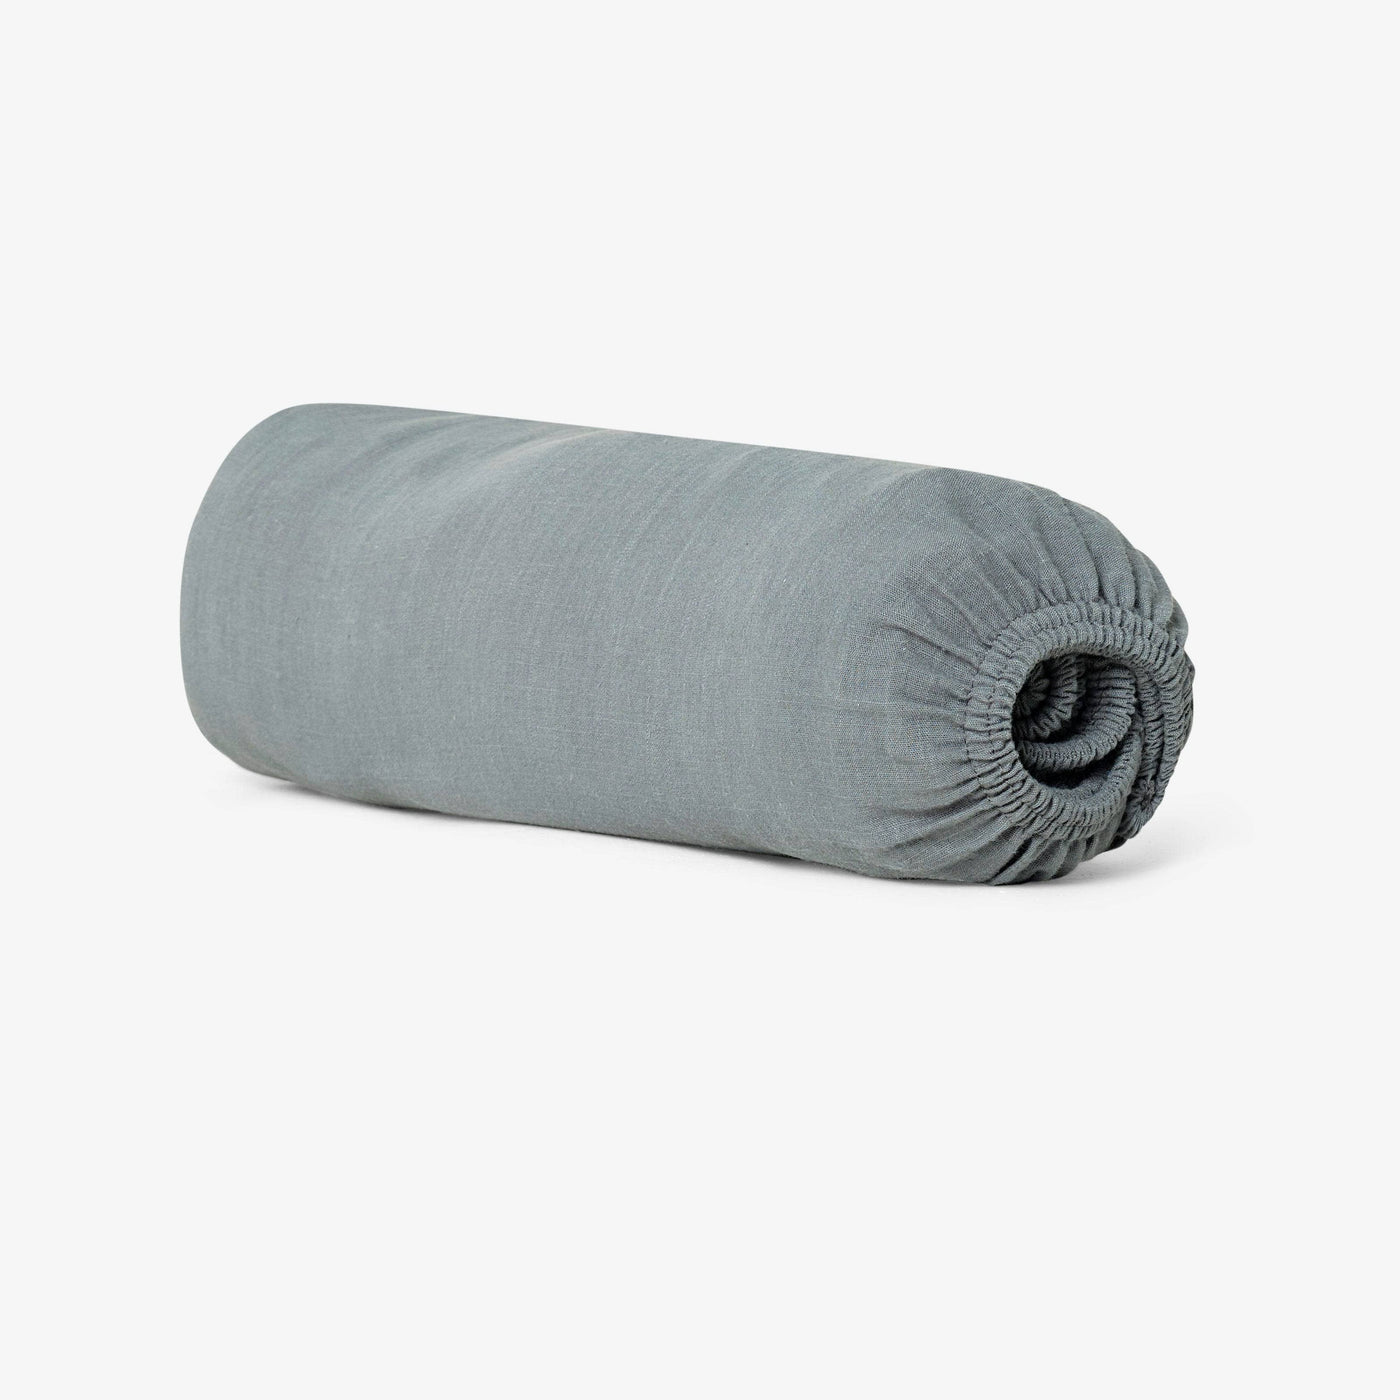 Ruby 100% Turkish Cotton Duvet Cover Set + Fitted Sheet, Anthracite Grey, Double Size Bedding Sets sazy.com